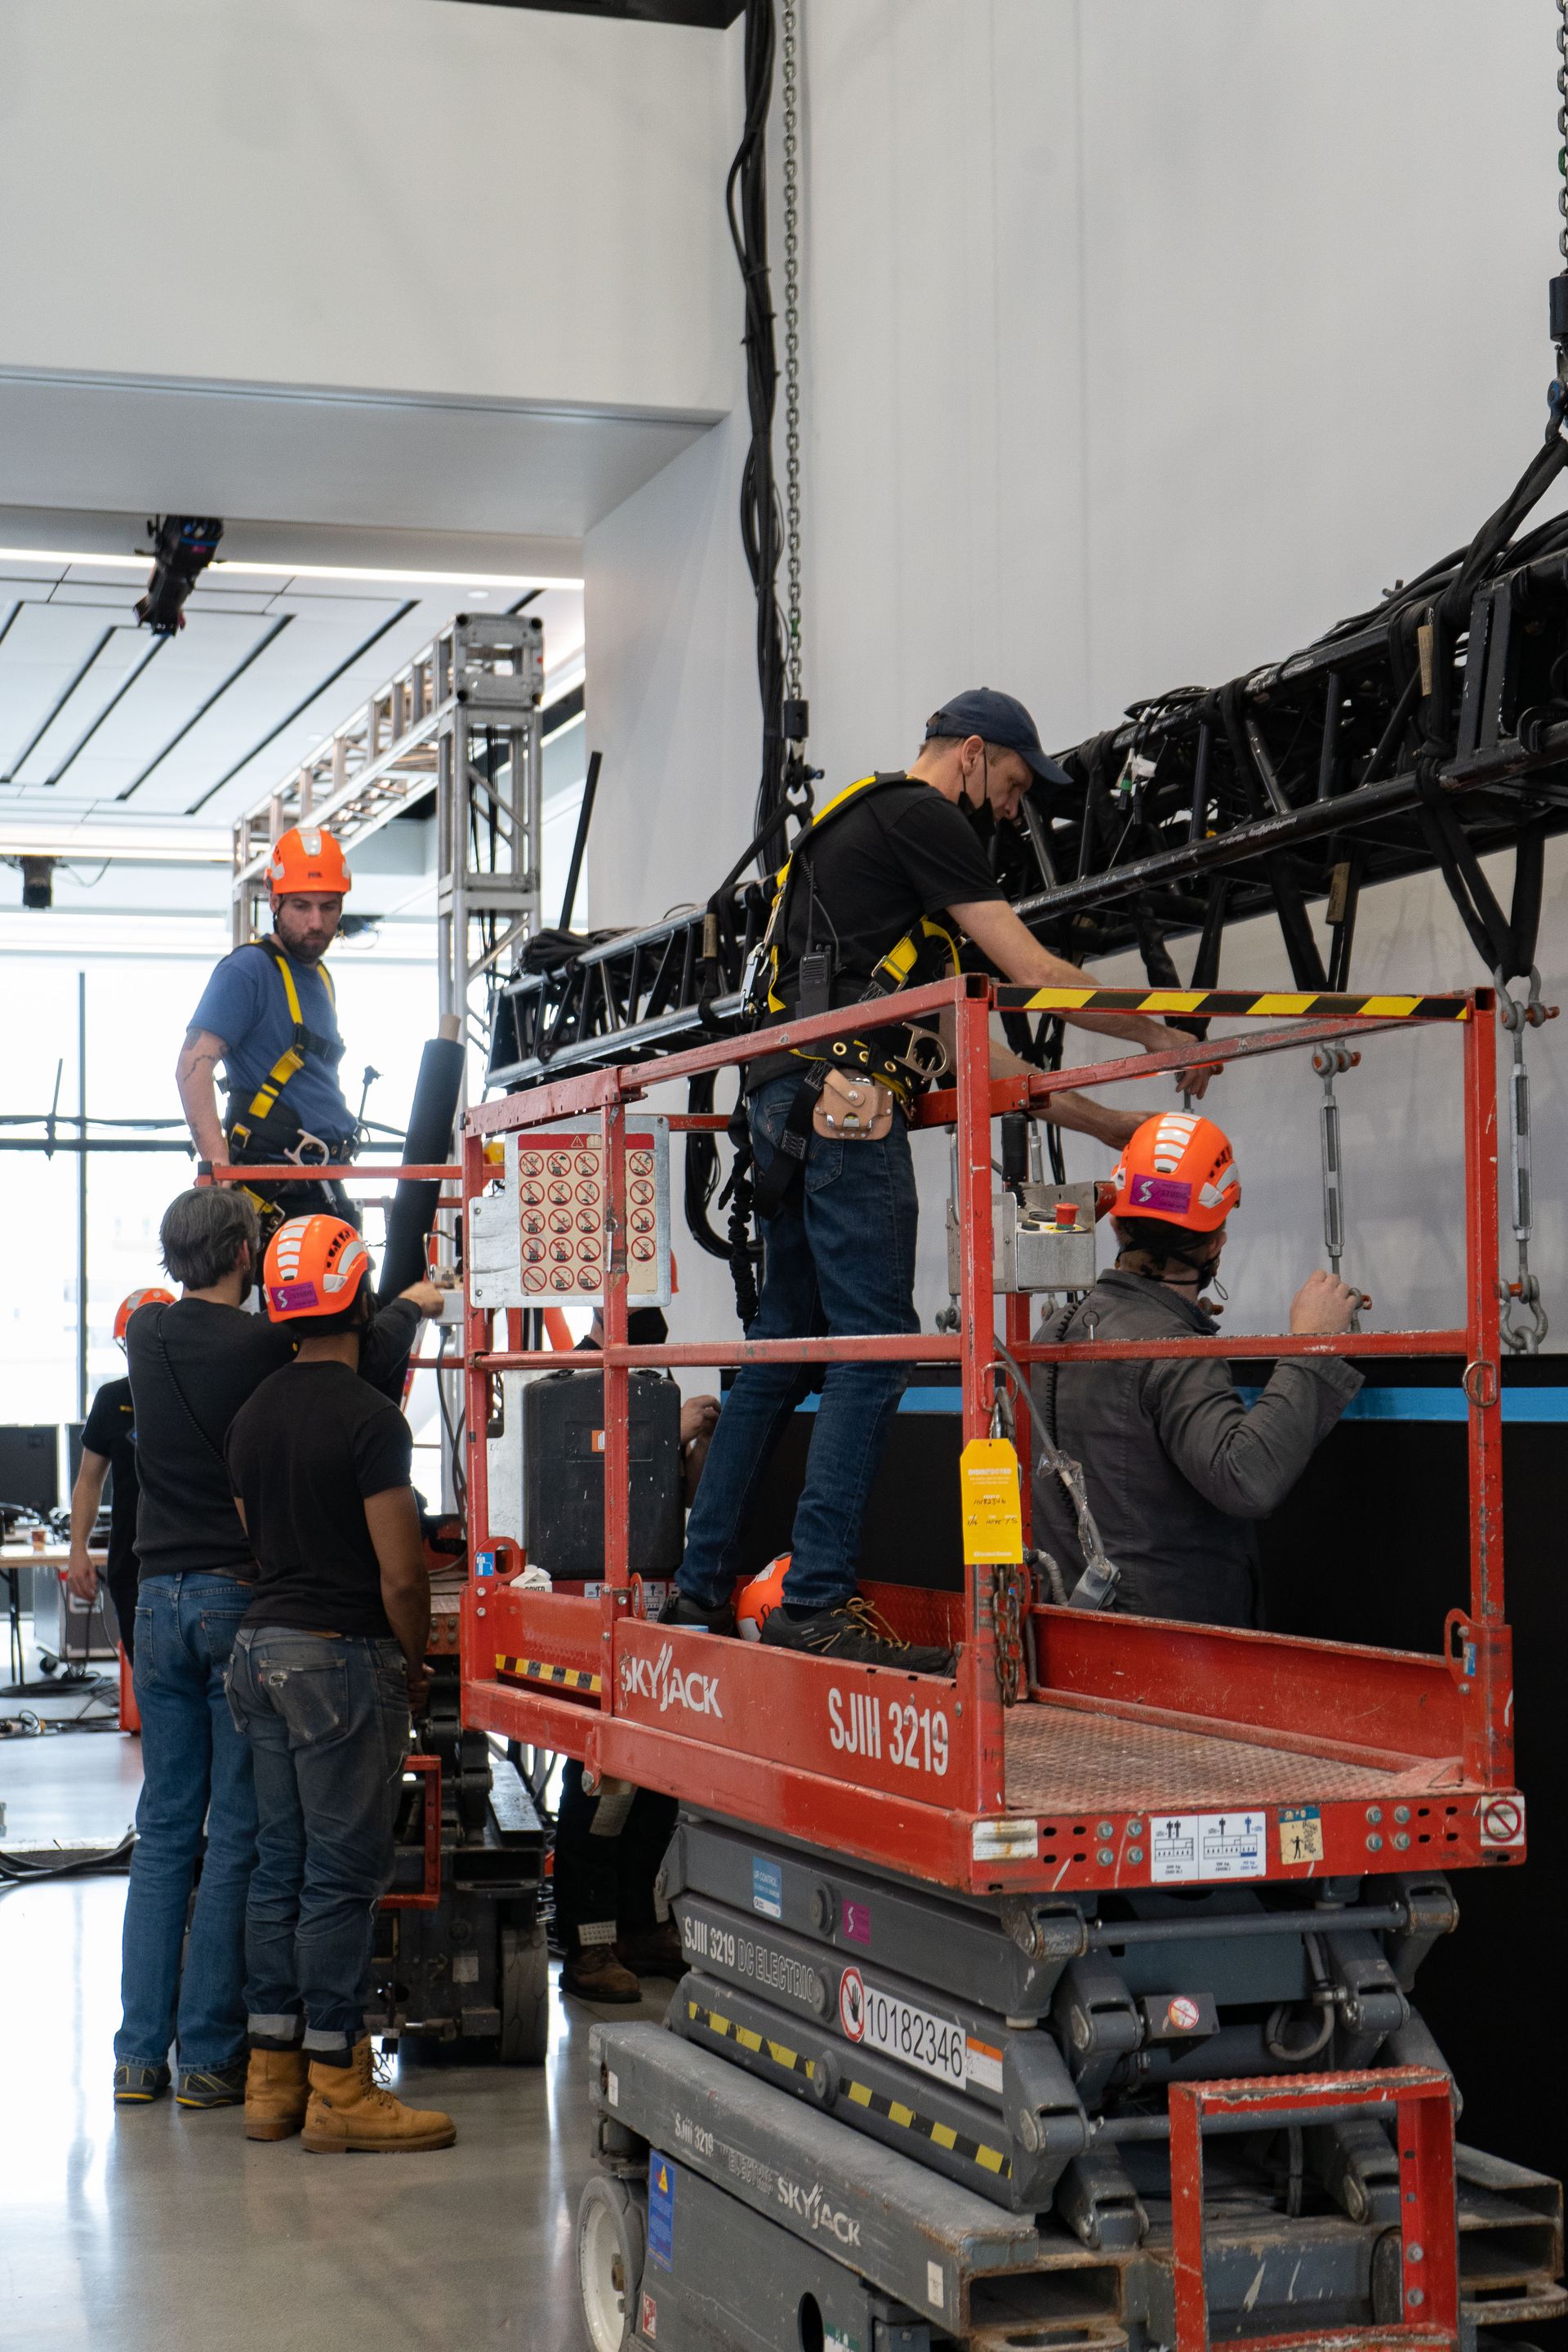 A group of men are working on a lift in a building.